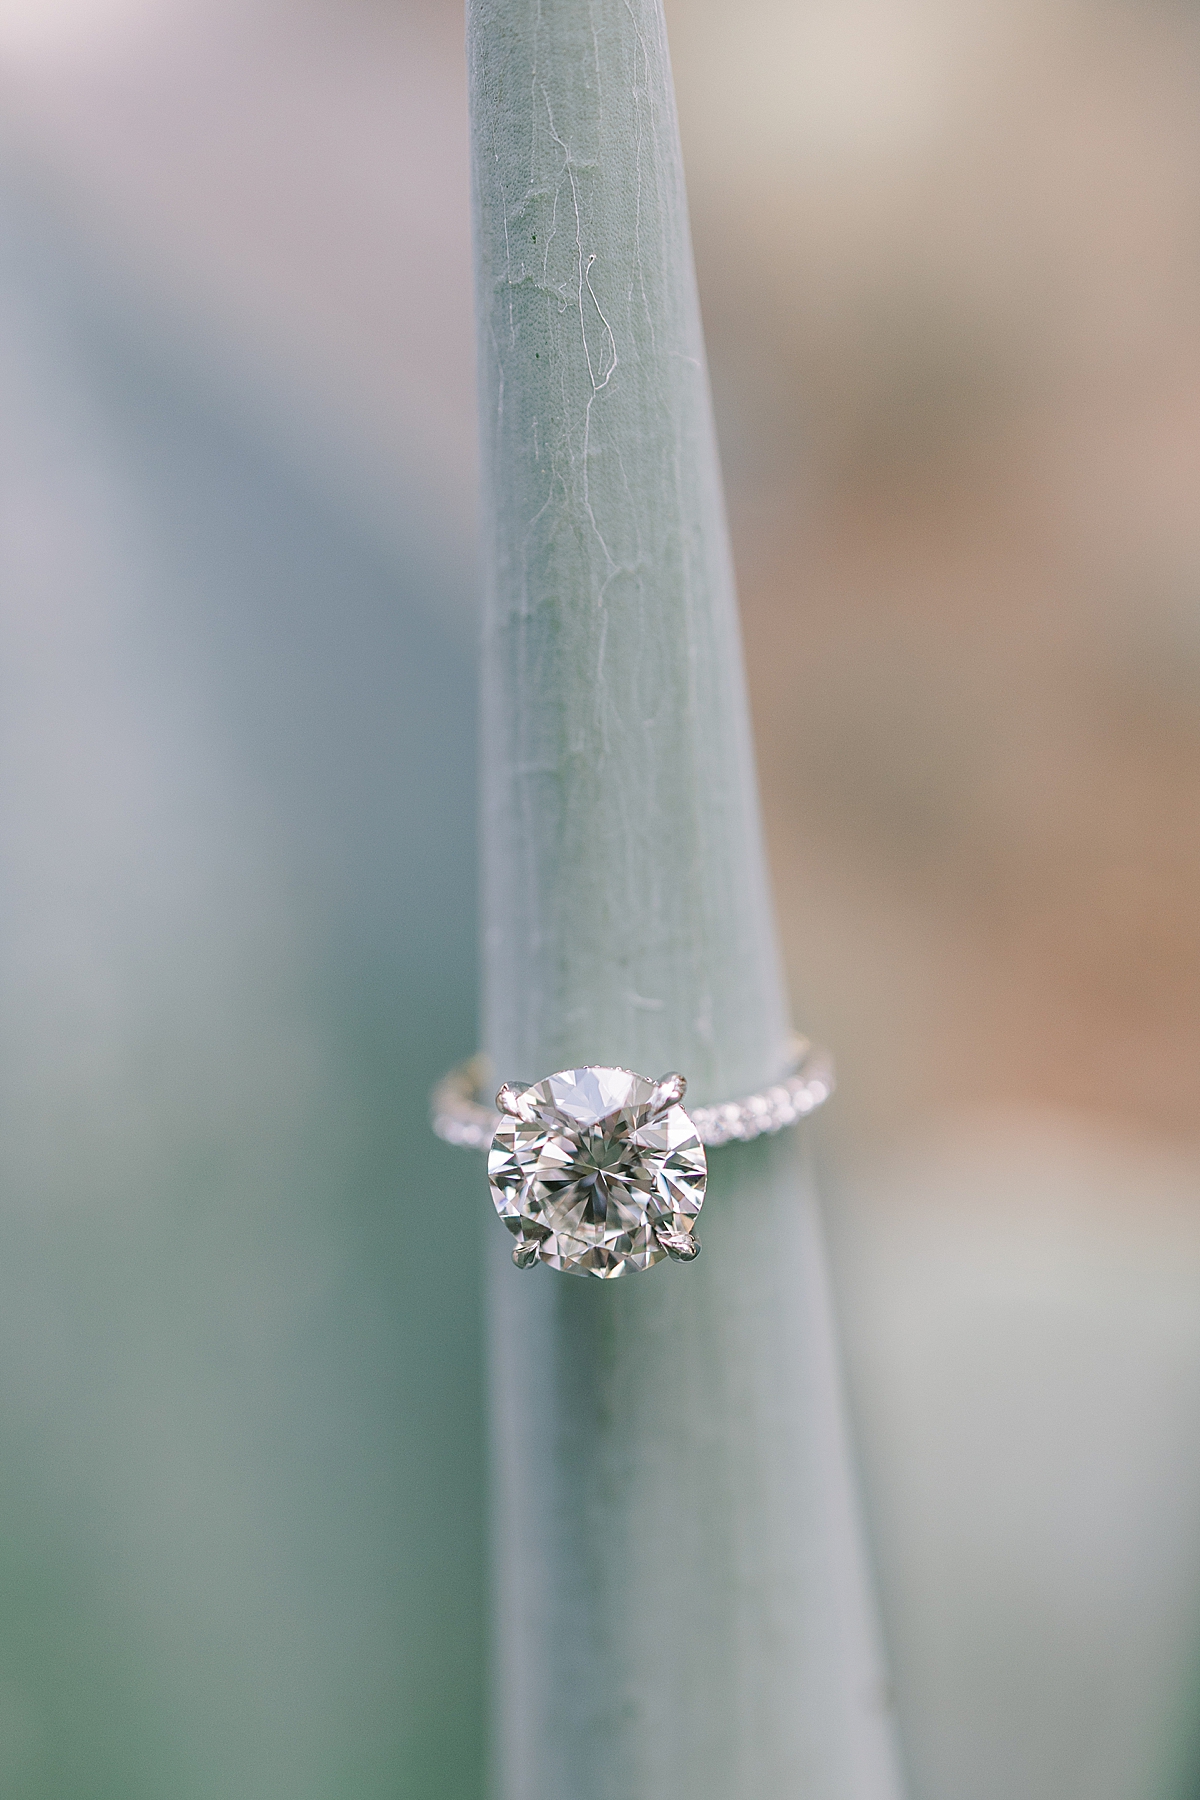 Justine's engagement ring from her Montecito proposal at Lotusland